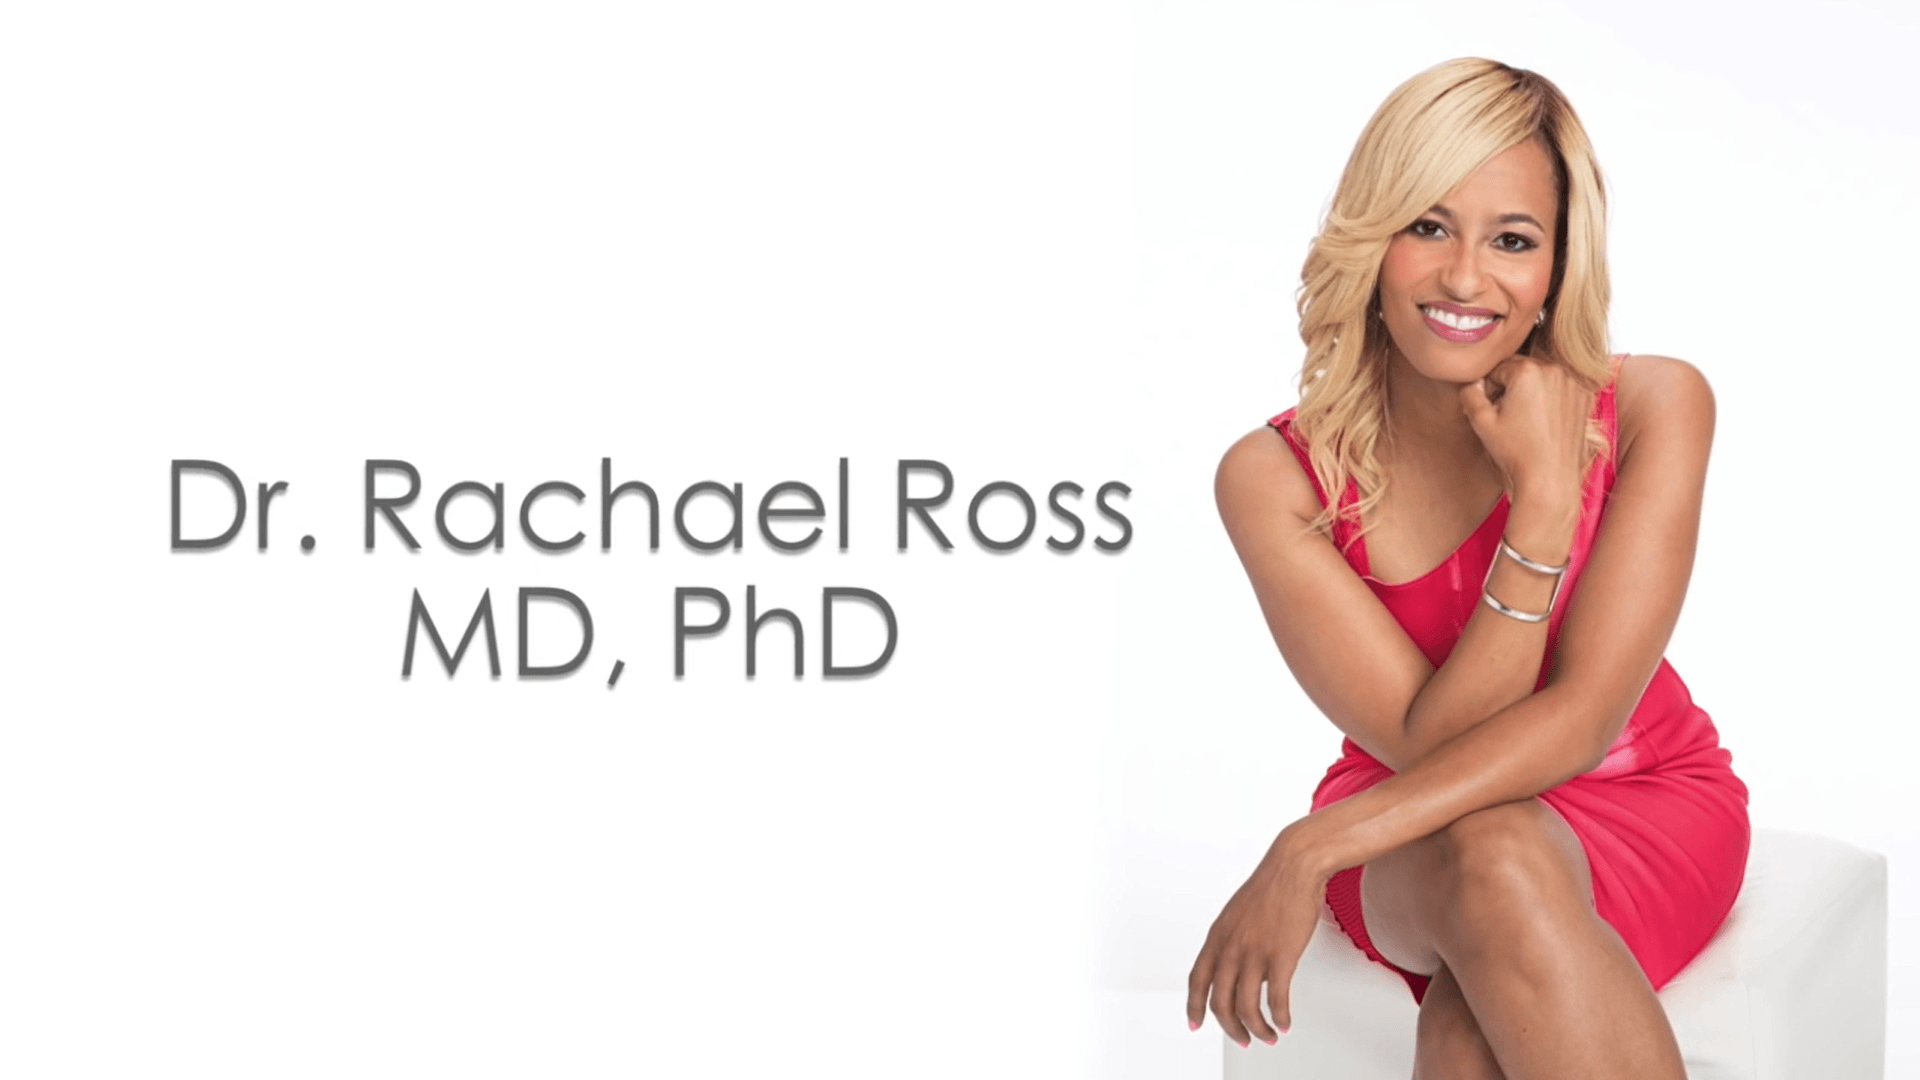 As a practicing physician for over 10 years, Dr. Rachael Ross has made it h...